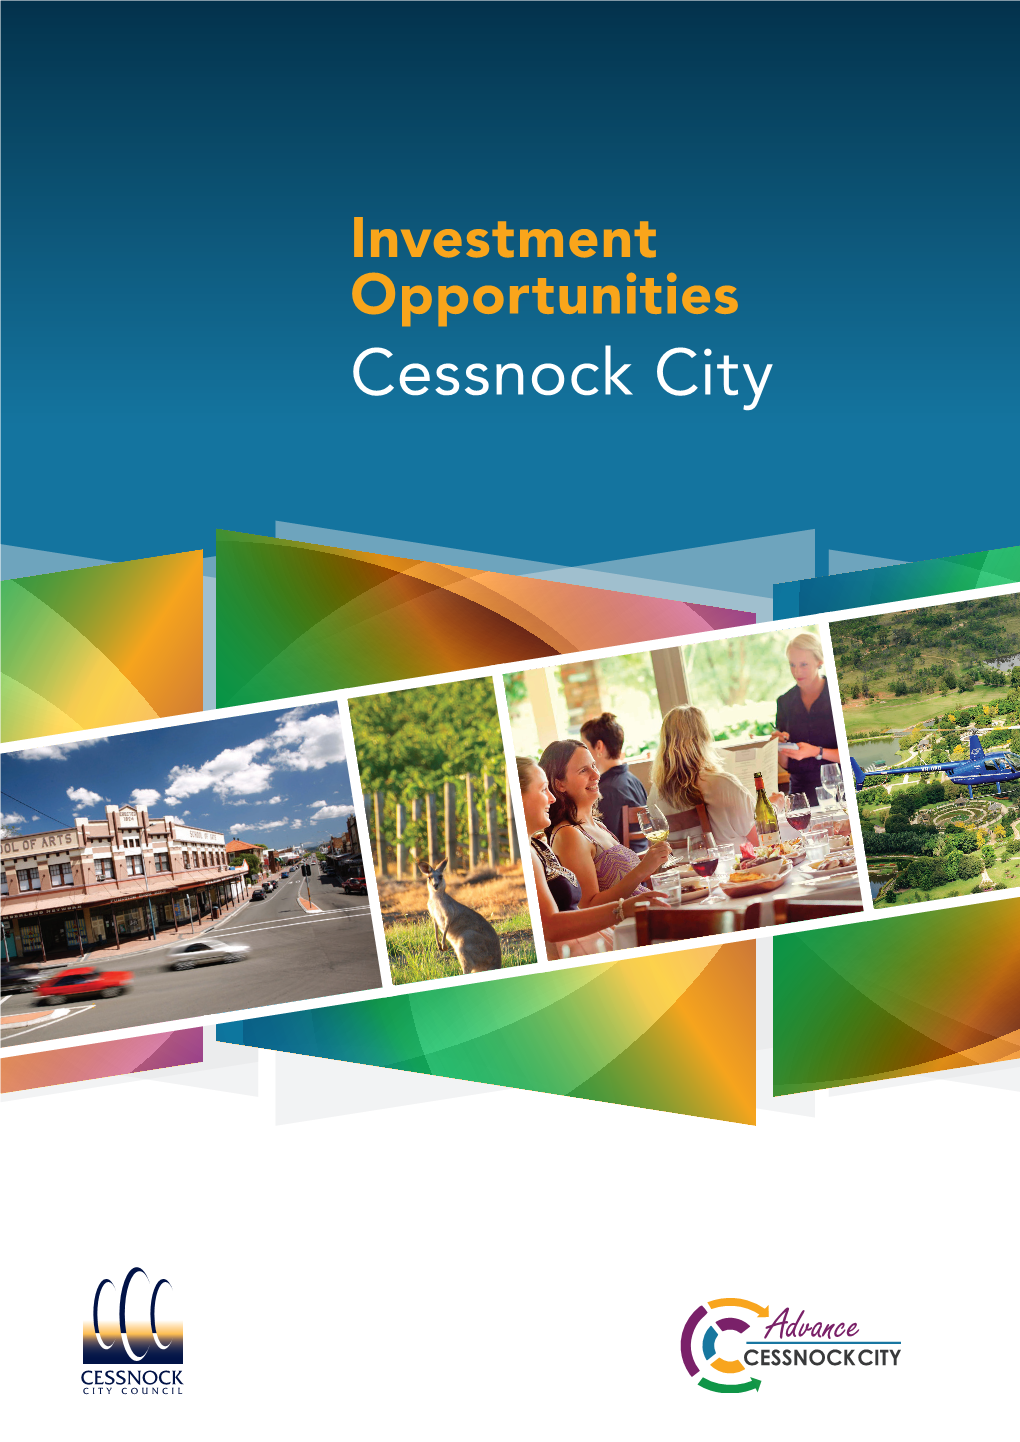 Investment Opportunities Cessnock City Business Investment Attraction Why Cessnock City? Why Cessnock City